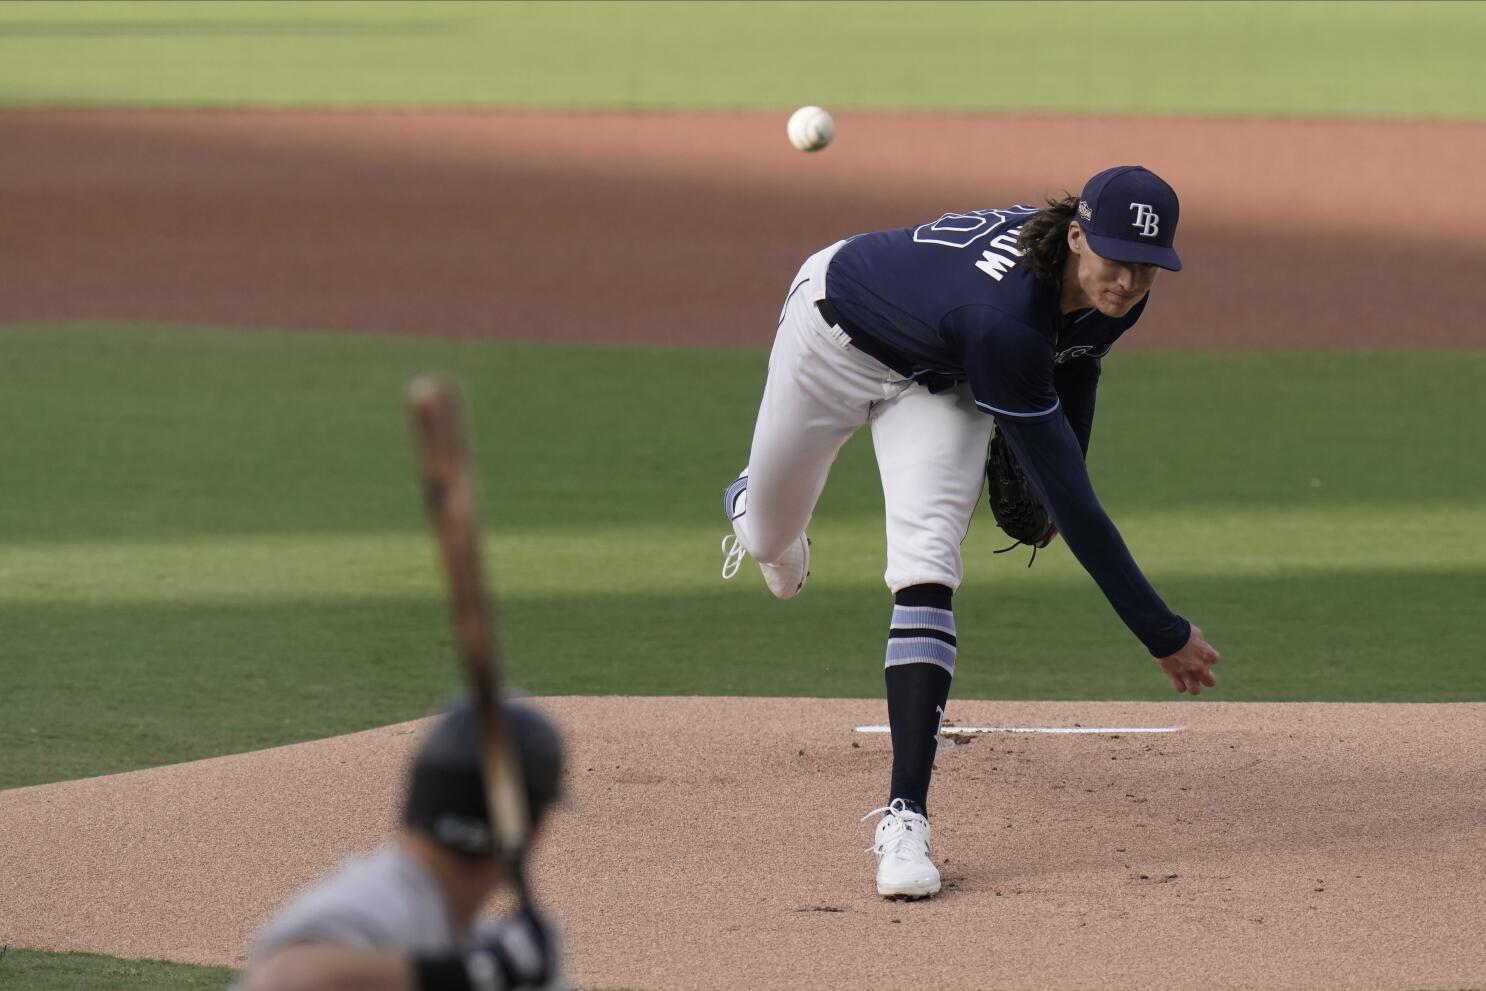 Chris Archer Ready For Second Chance With Rays